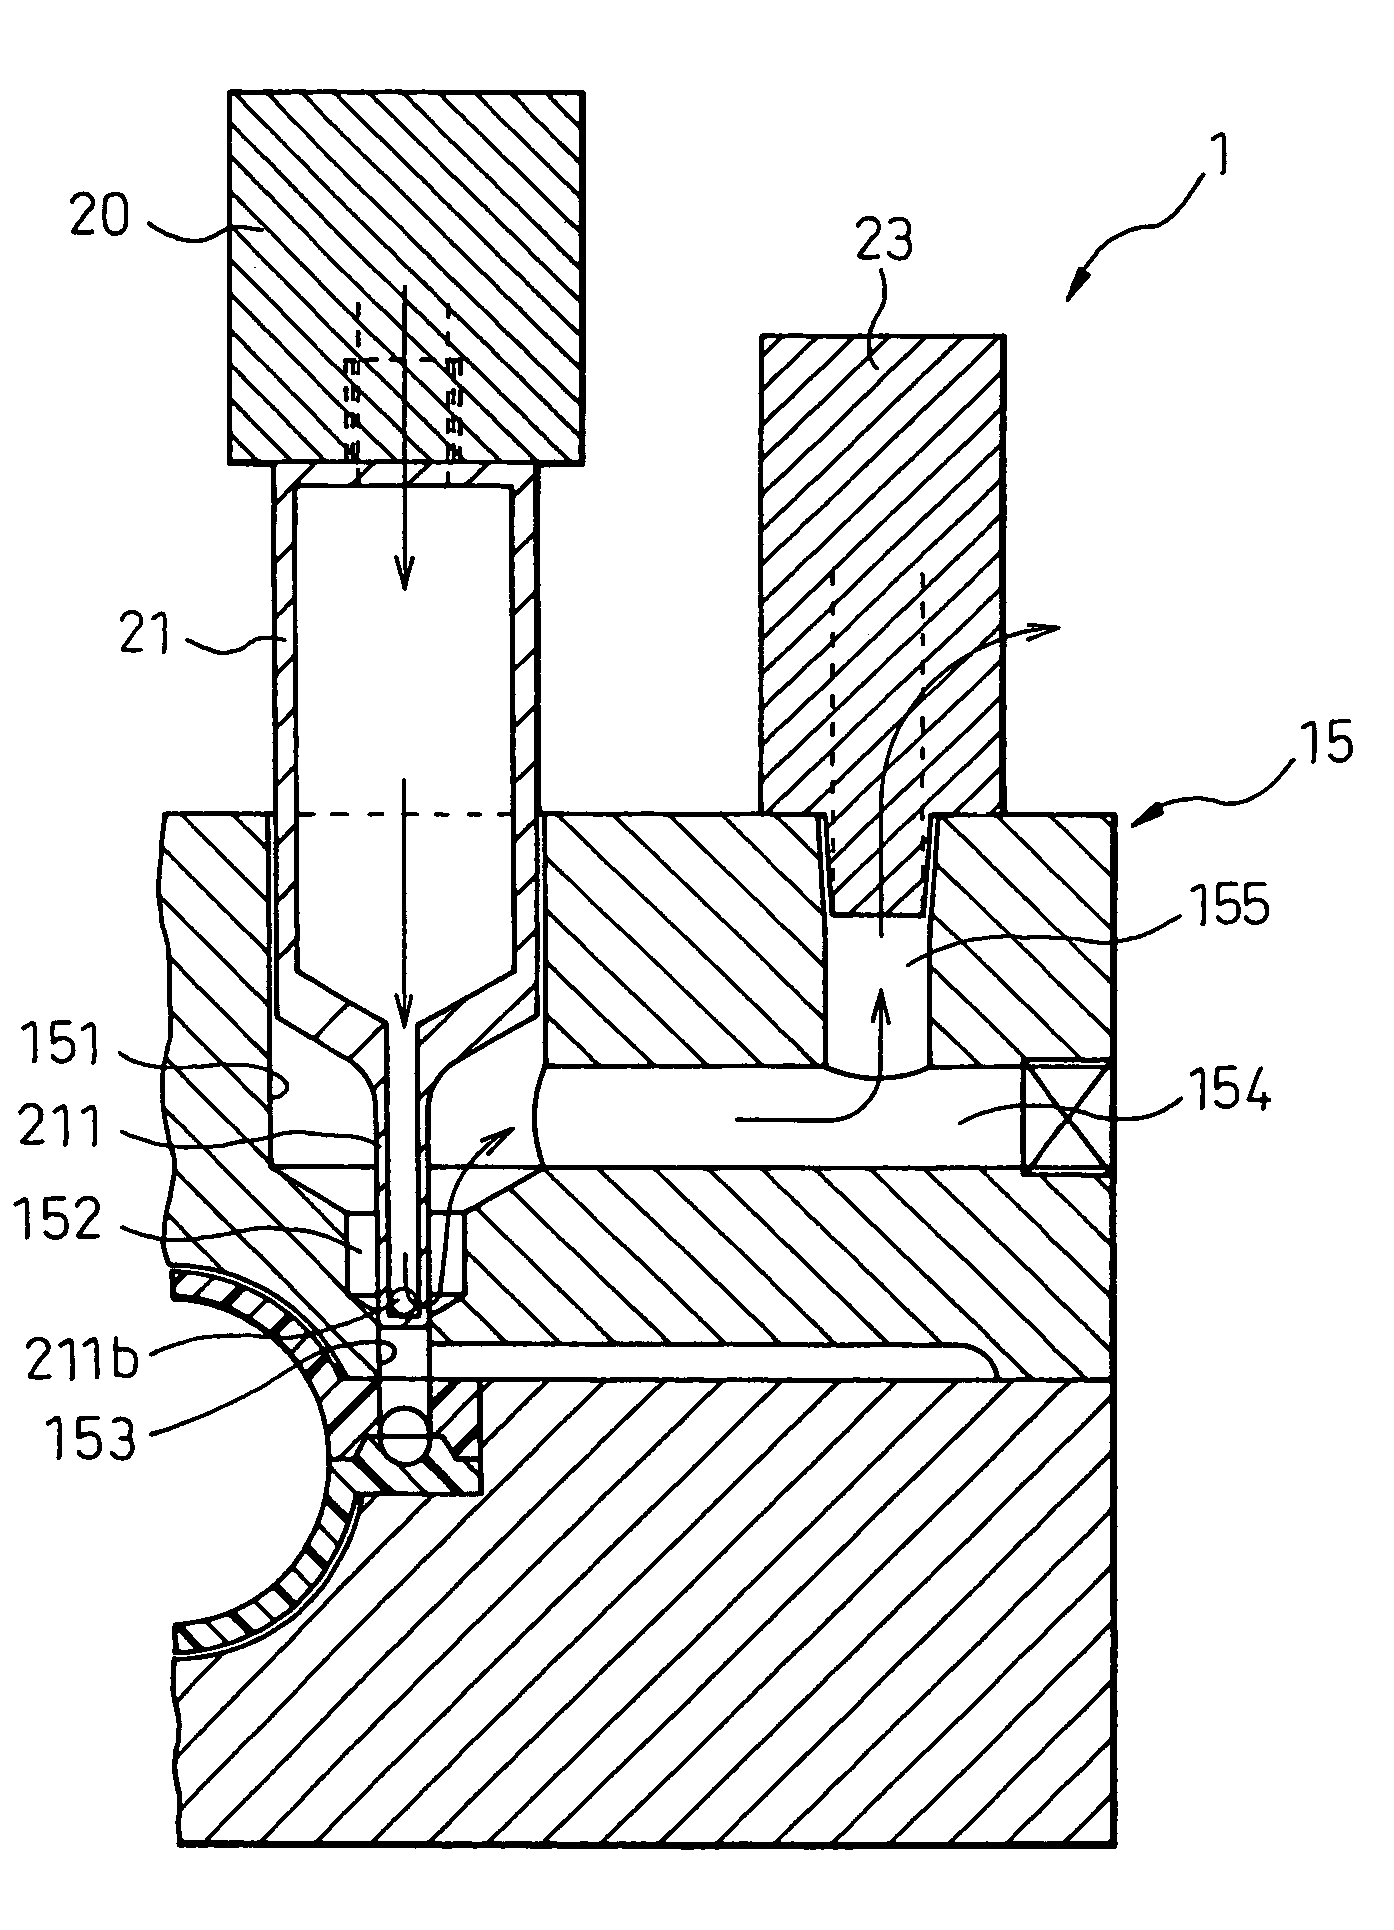 Heated medium supplying method and structure for secondary molding of resin molded component